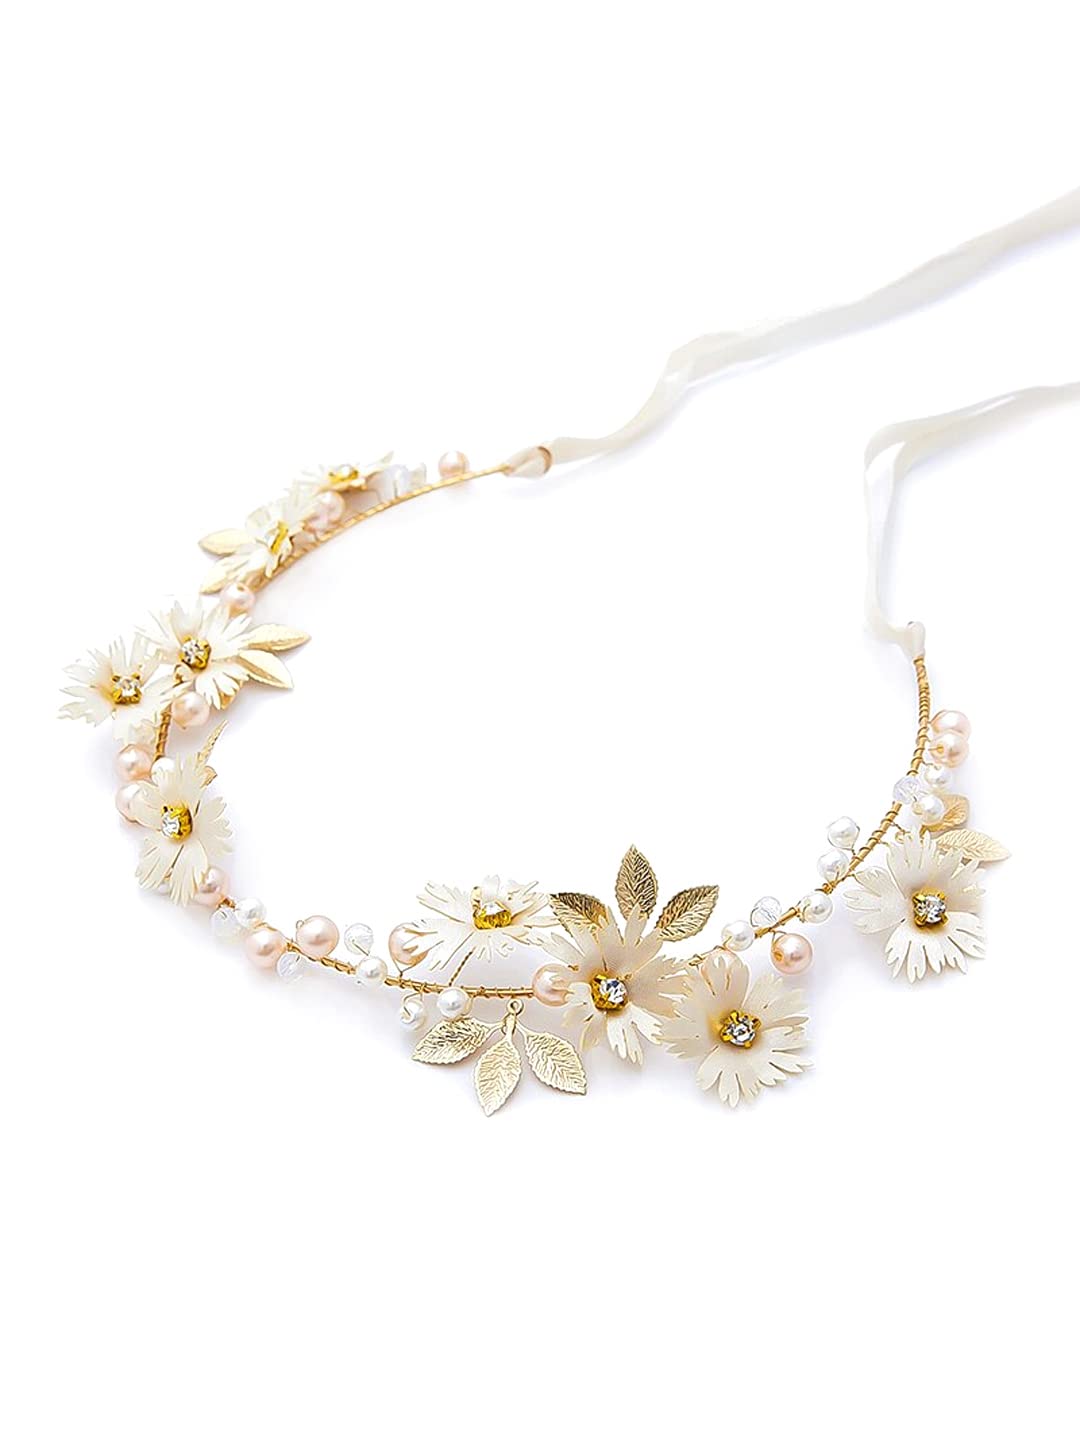 Yellow Chimes Tiara for Women and Girls Floral Hair Vine for Women Gold Bridal Hair Vine Tiara Headband Hair Accessories Wedding Jewellery for Girls and Women Bridal Hair Accessories for Wedding.